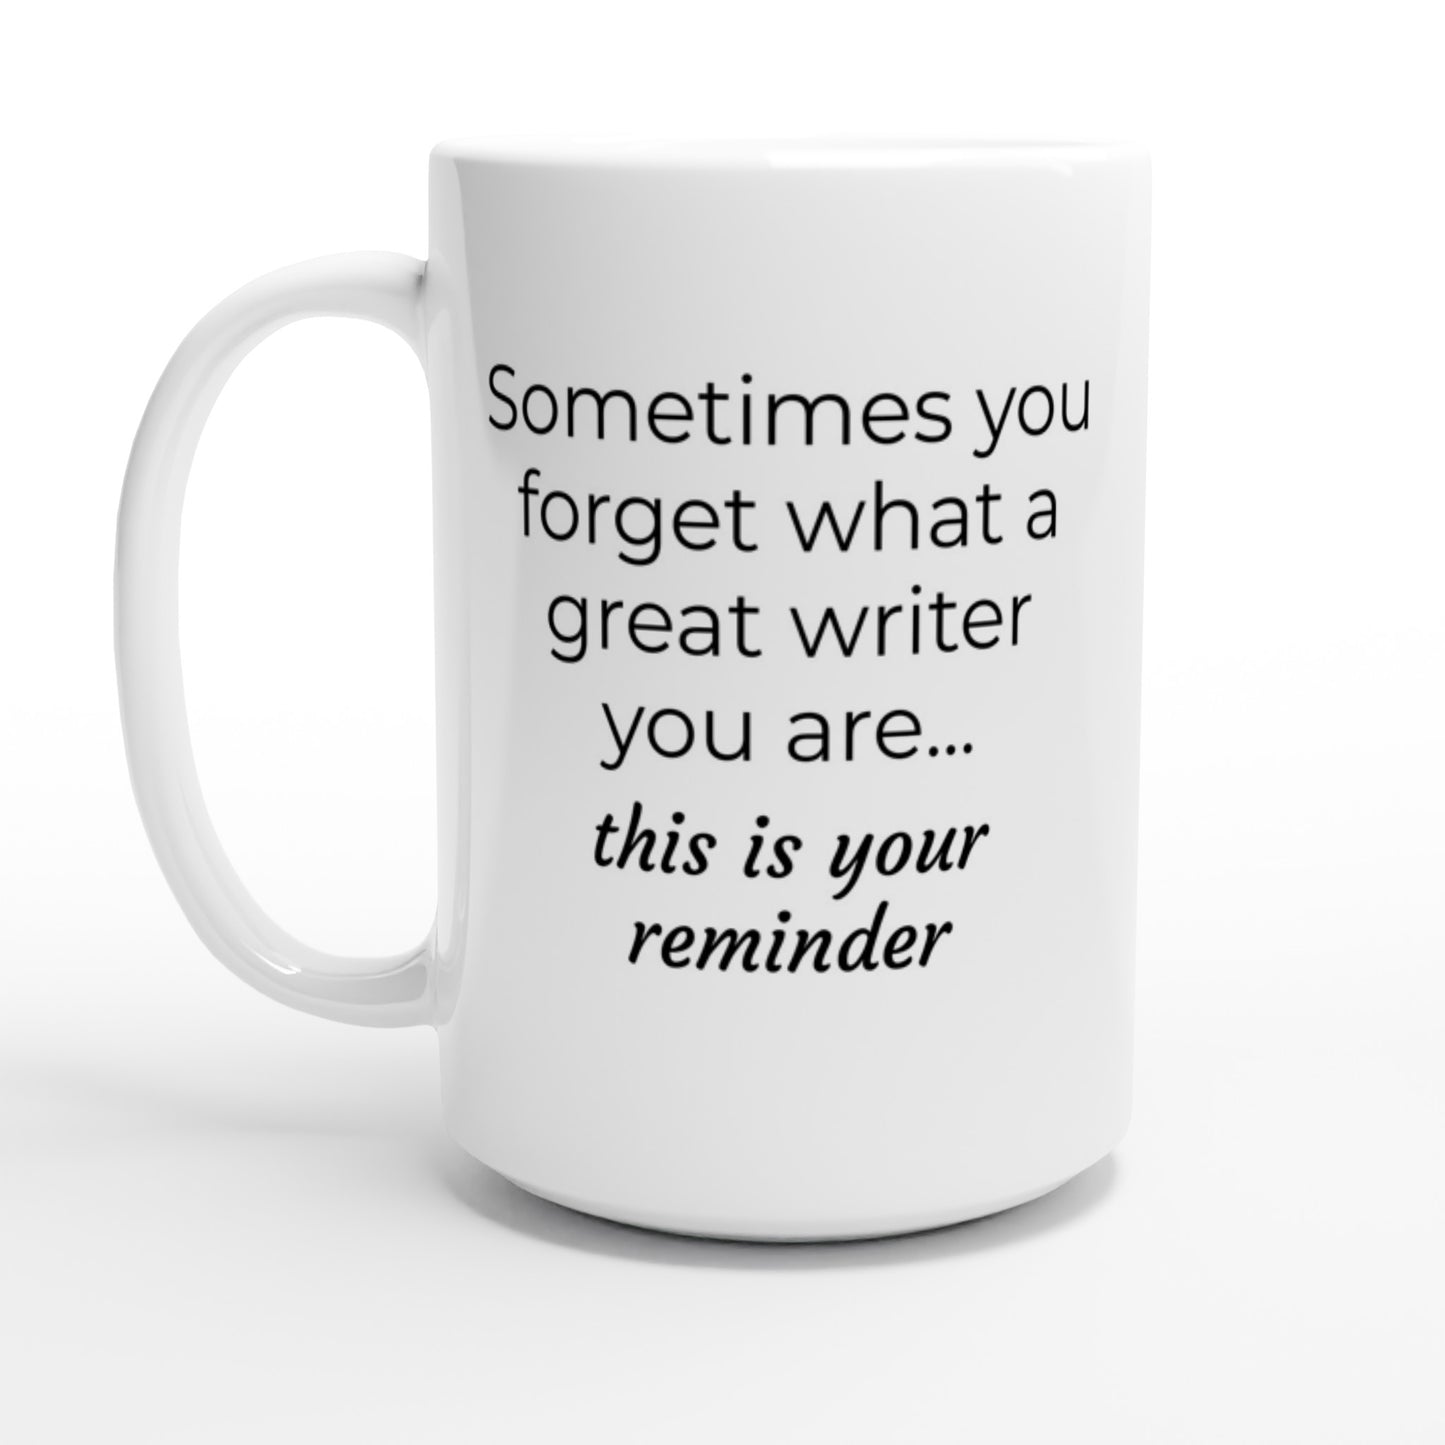 Writing Themed Mug // Sometimes you forget what a great writer you are...